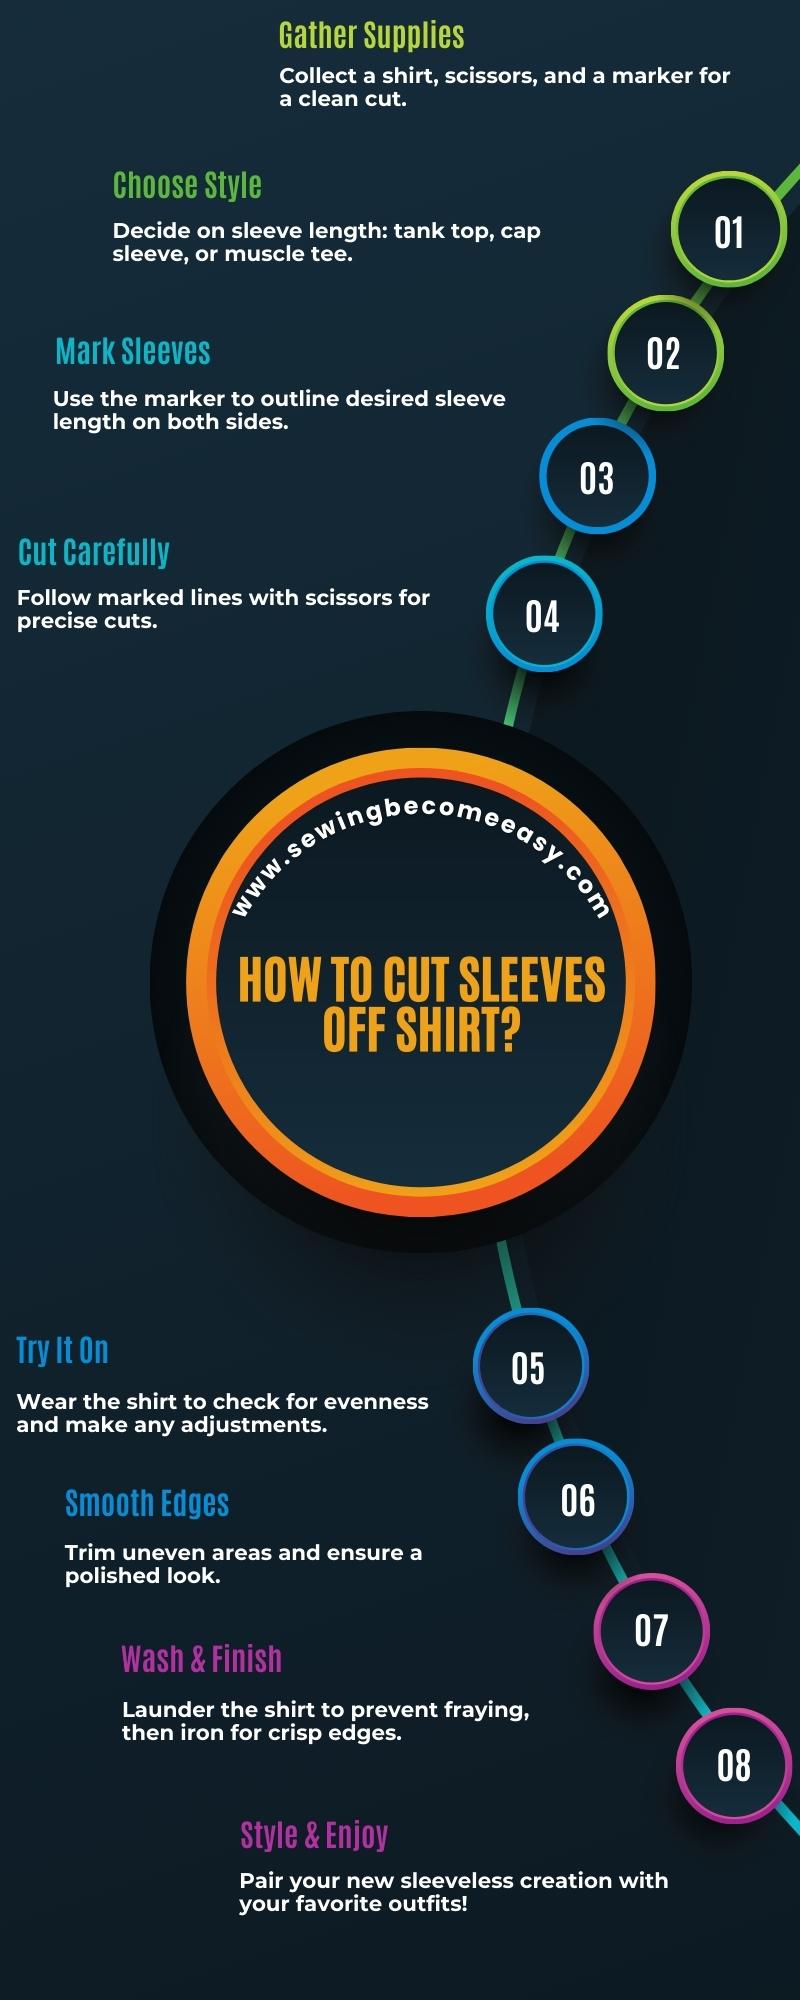 How to Cut Sleeves Off Shirt